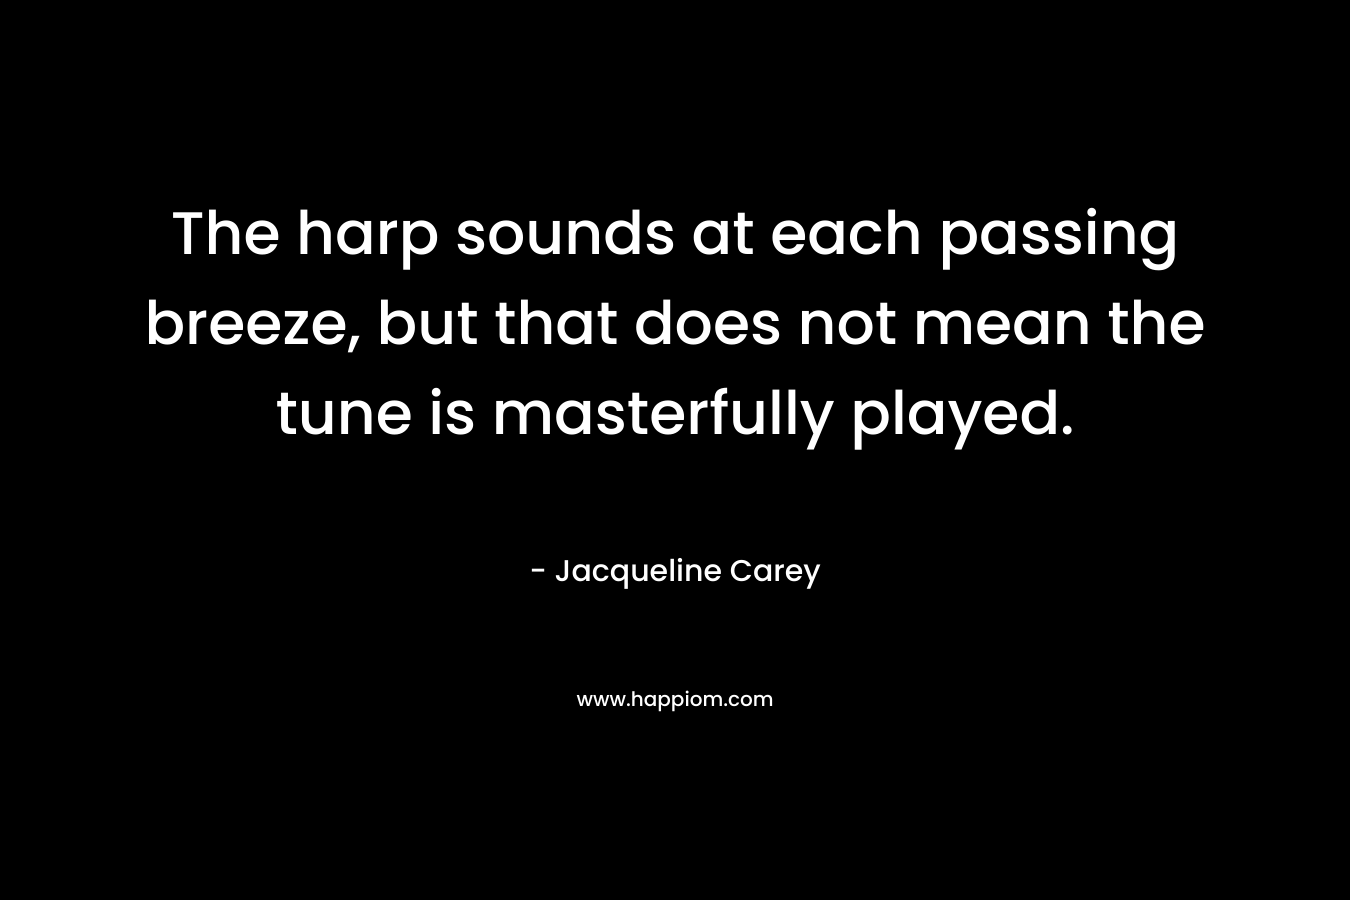 The harp sounds at each passing breeze, but that does not mean the tune is masterfully played. – Jacqueline Carey